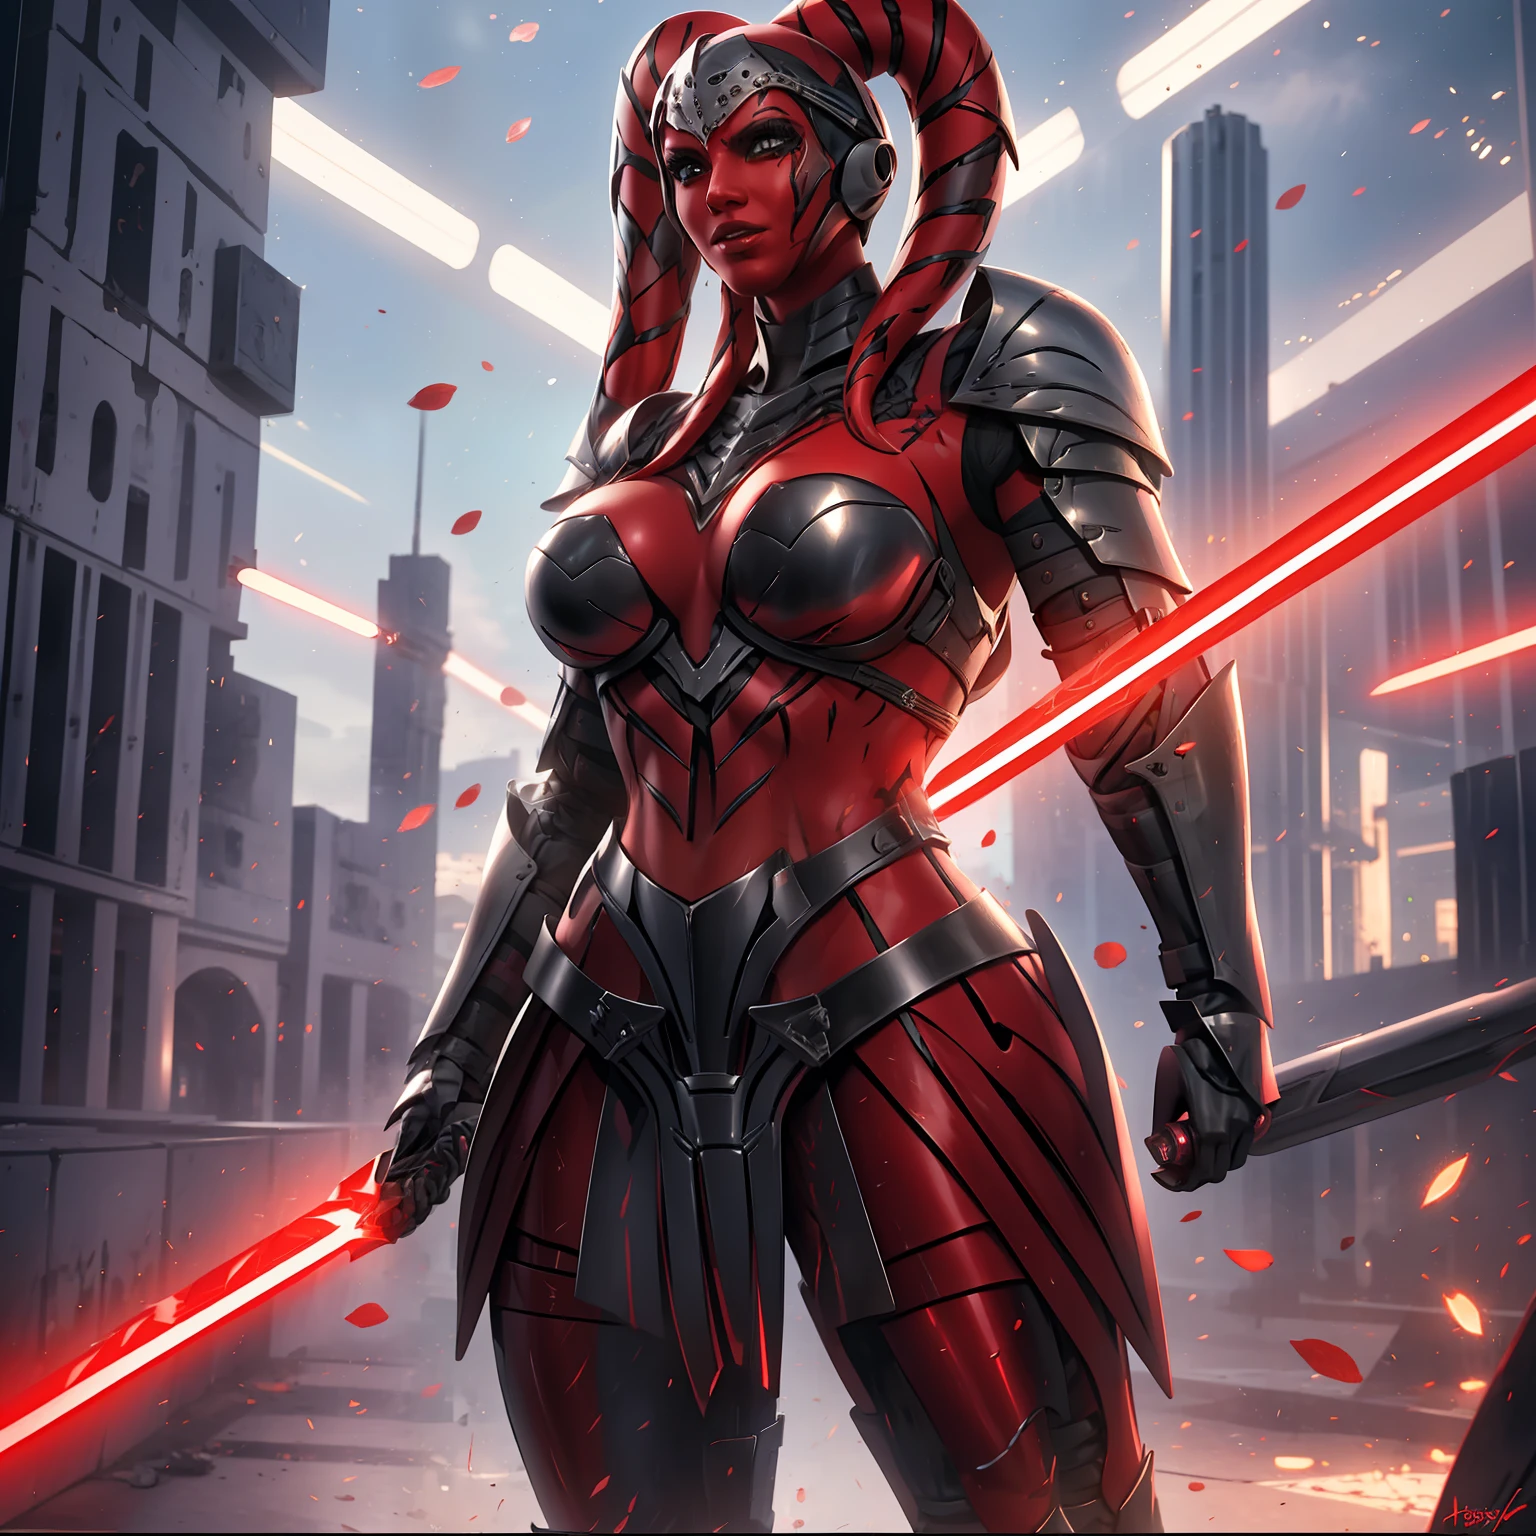 Strong red skin twi'lek gladiator, heavy black armor, dual red lightsabers, modest, fully clothed, heavy armor, battle armor, knight plate, large breasts